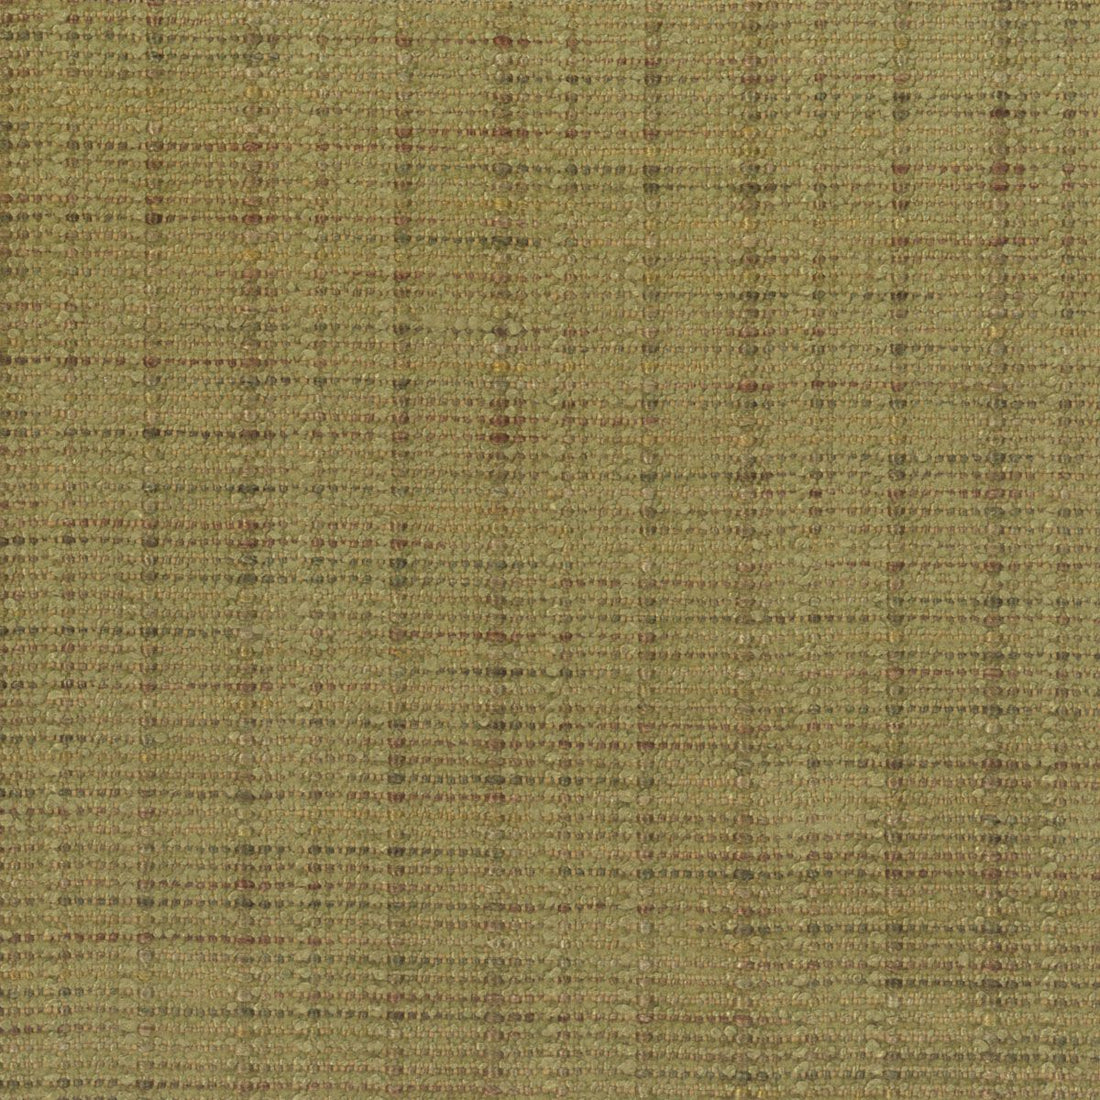 Maddox fabric in marsh color - pattern number VW 0003F017 - by Scalamandre in the Old World Weavers collection